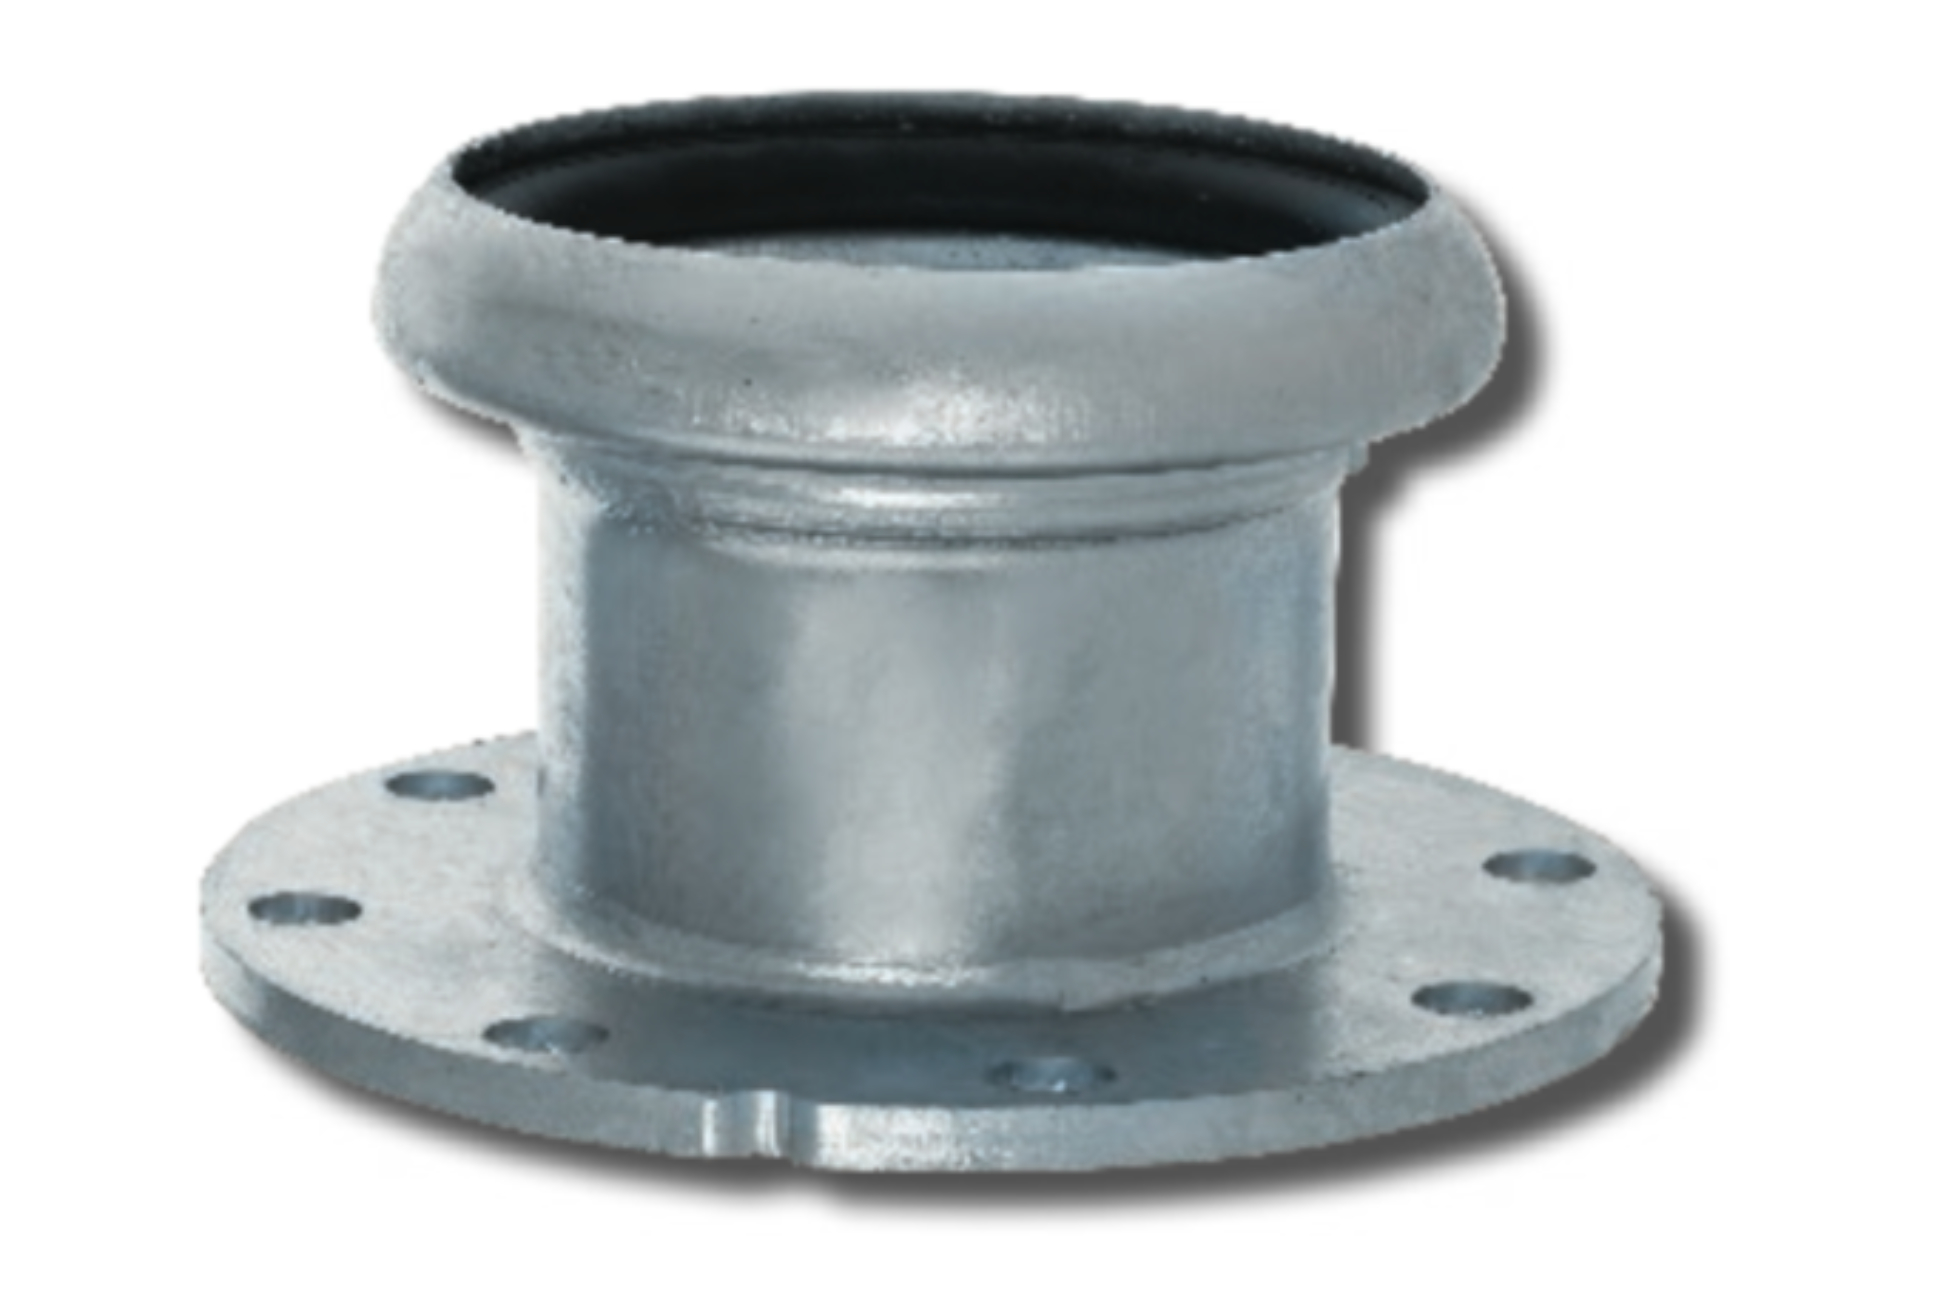 Stainless Steel RTJ Flanges, B16.5 Ring Joint Flange Dimensions